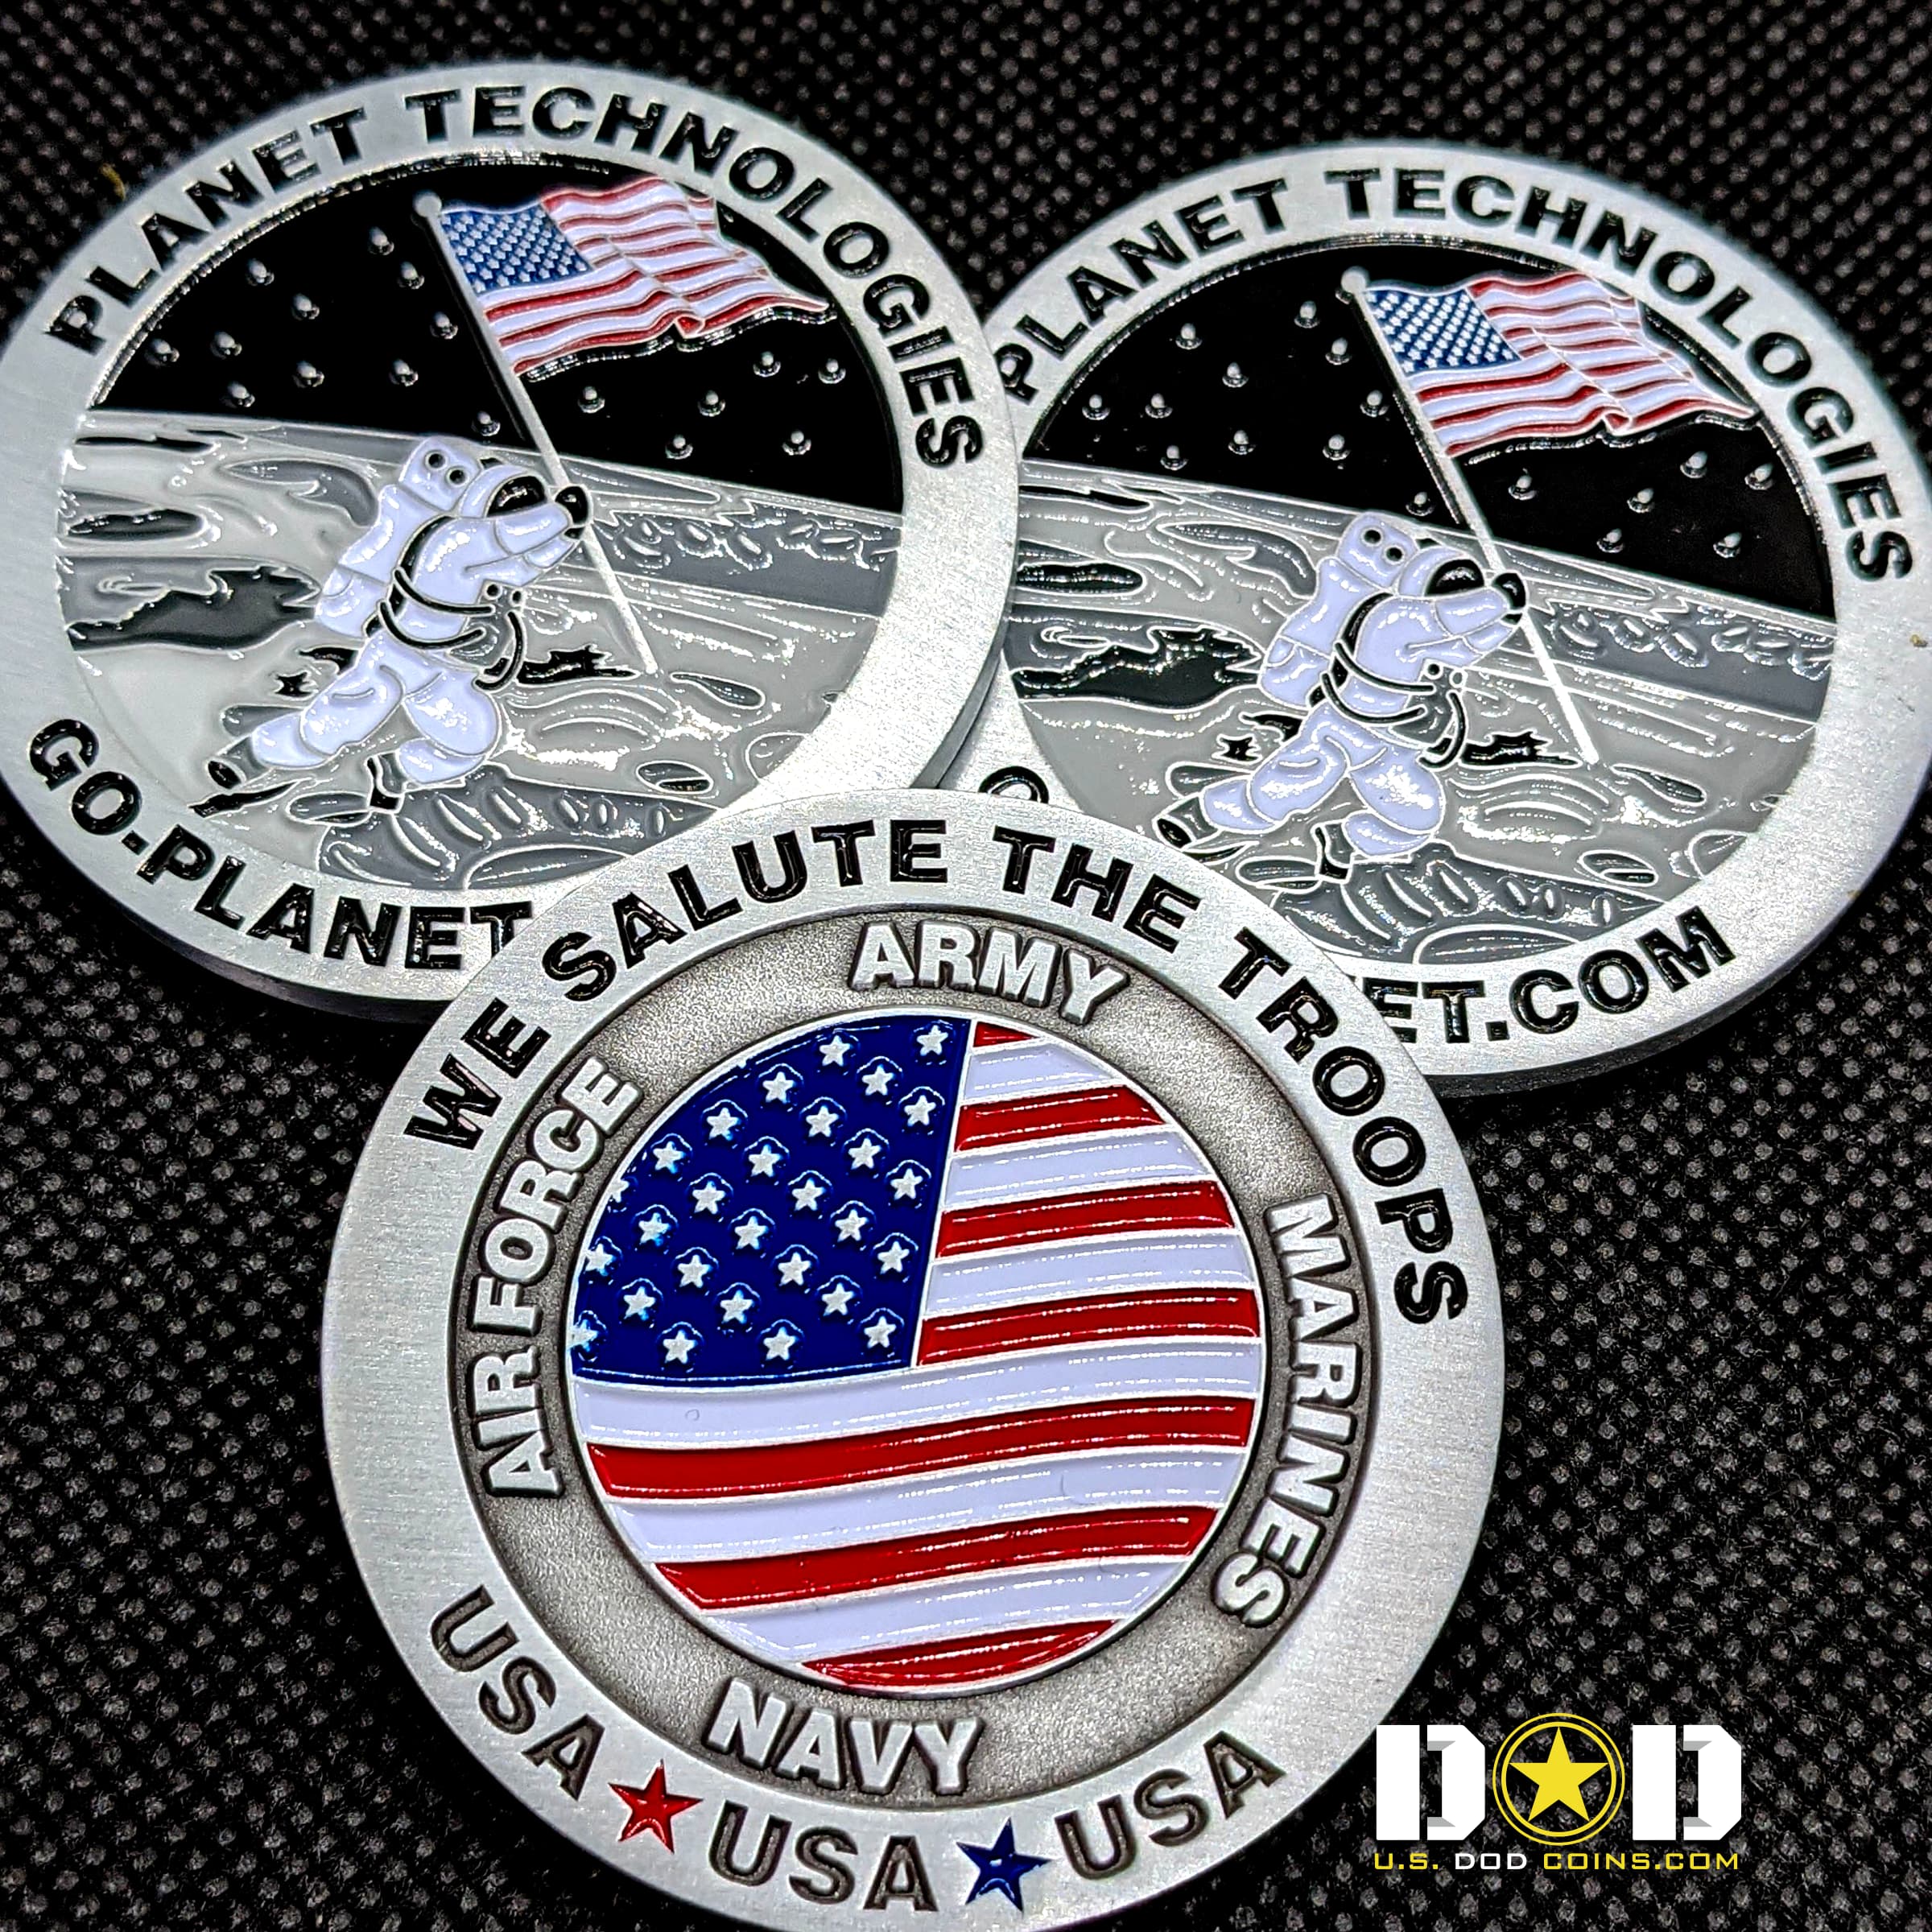 Planet-Technologies-Challenge-Coin_0000_USDODCoins-Challenge-Coins-Examples-61